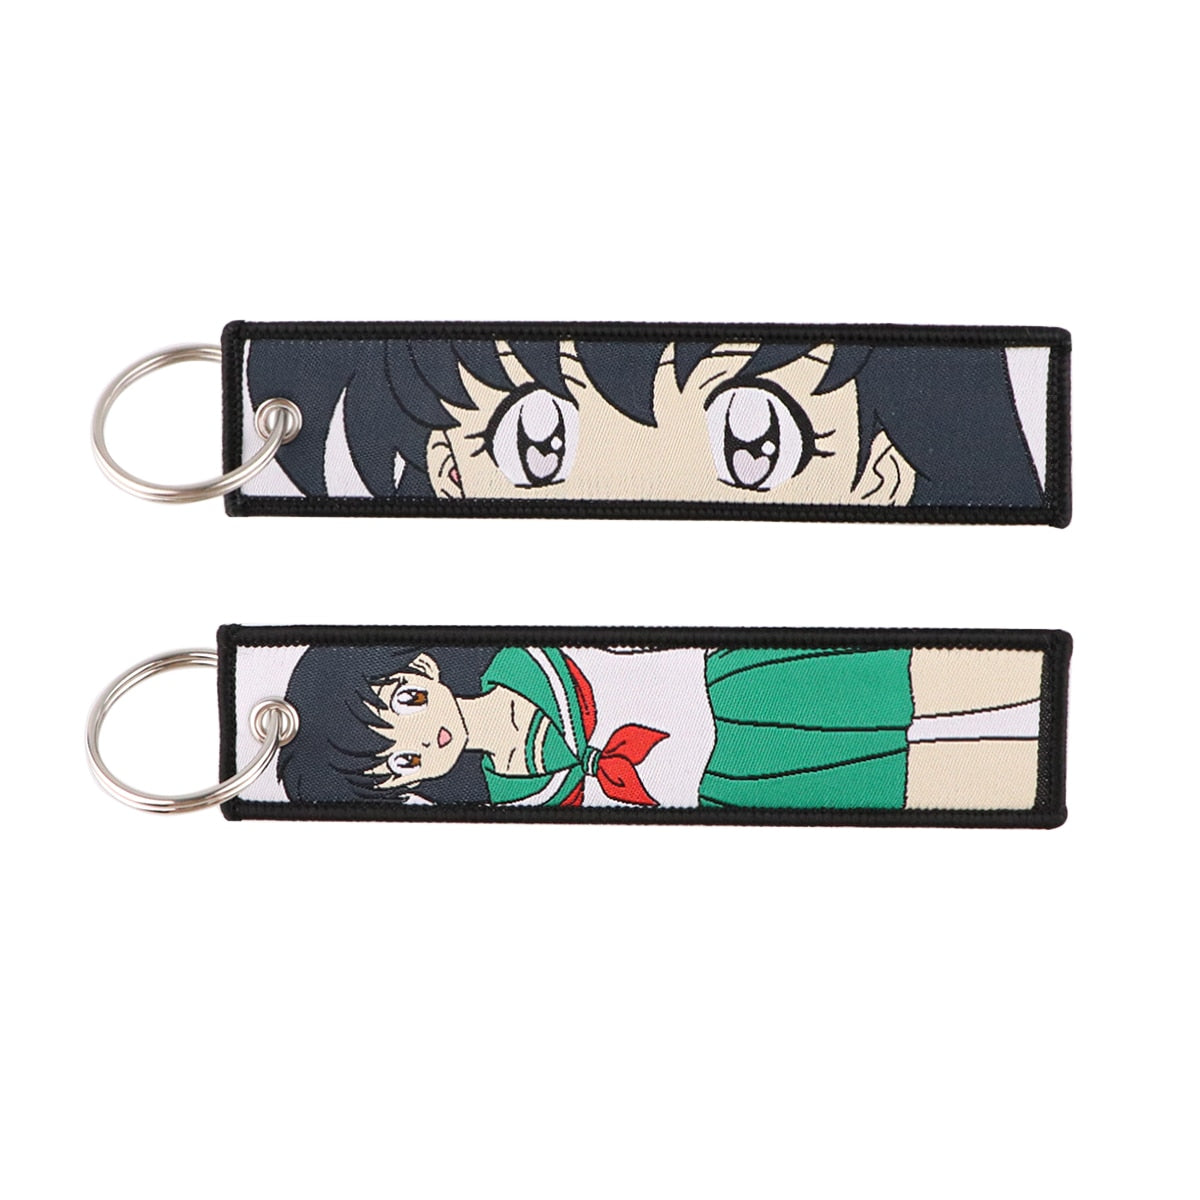 Anime Embroidery Keychain Key Ring 93